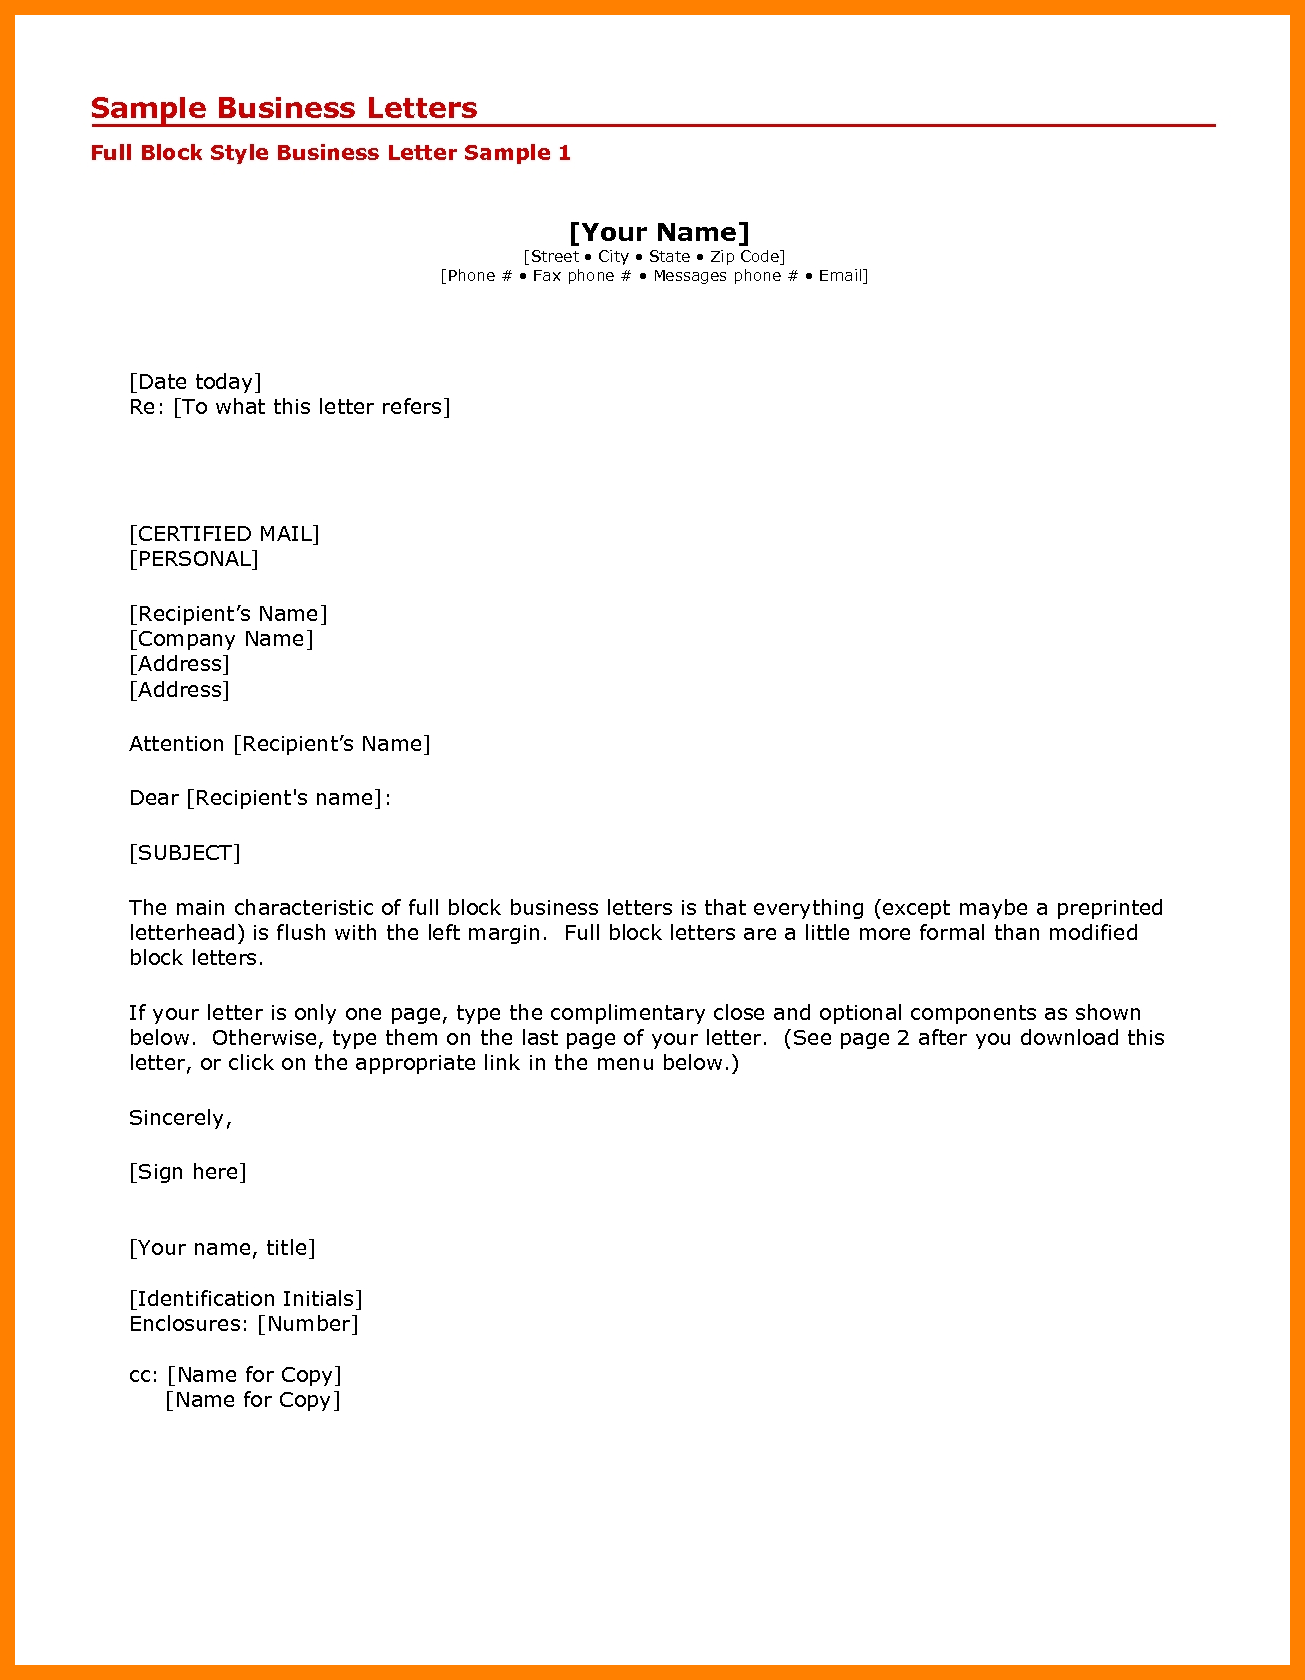 Sample Letter Of Request To Change Work Schedule Scrumps